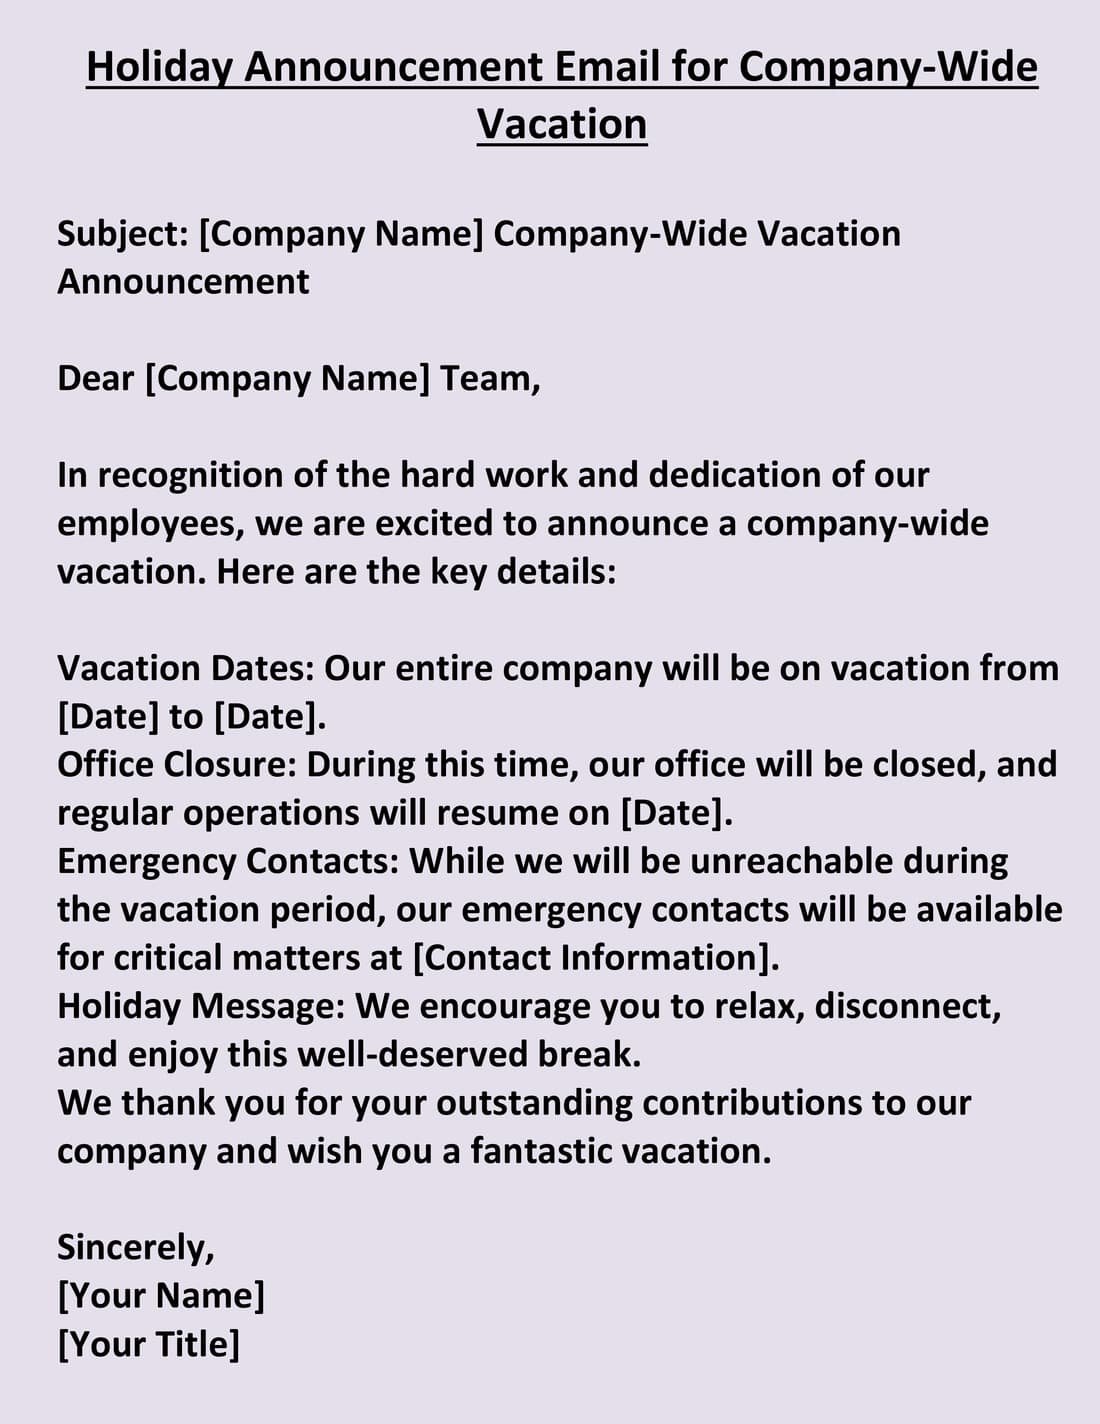 Holiday Announcement Email for Company-Wide Vacation